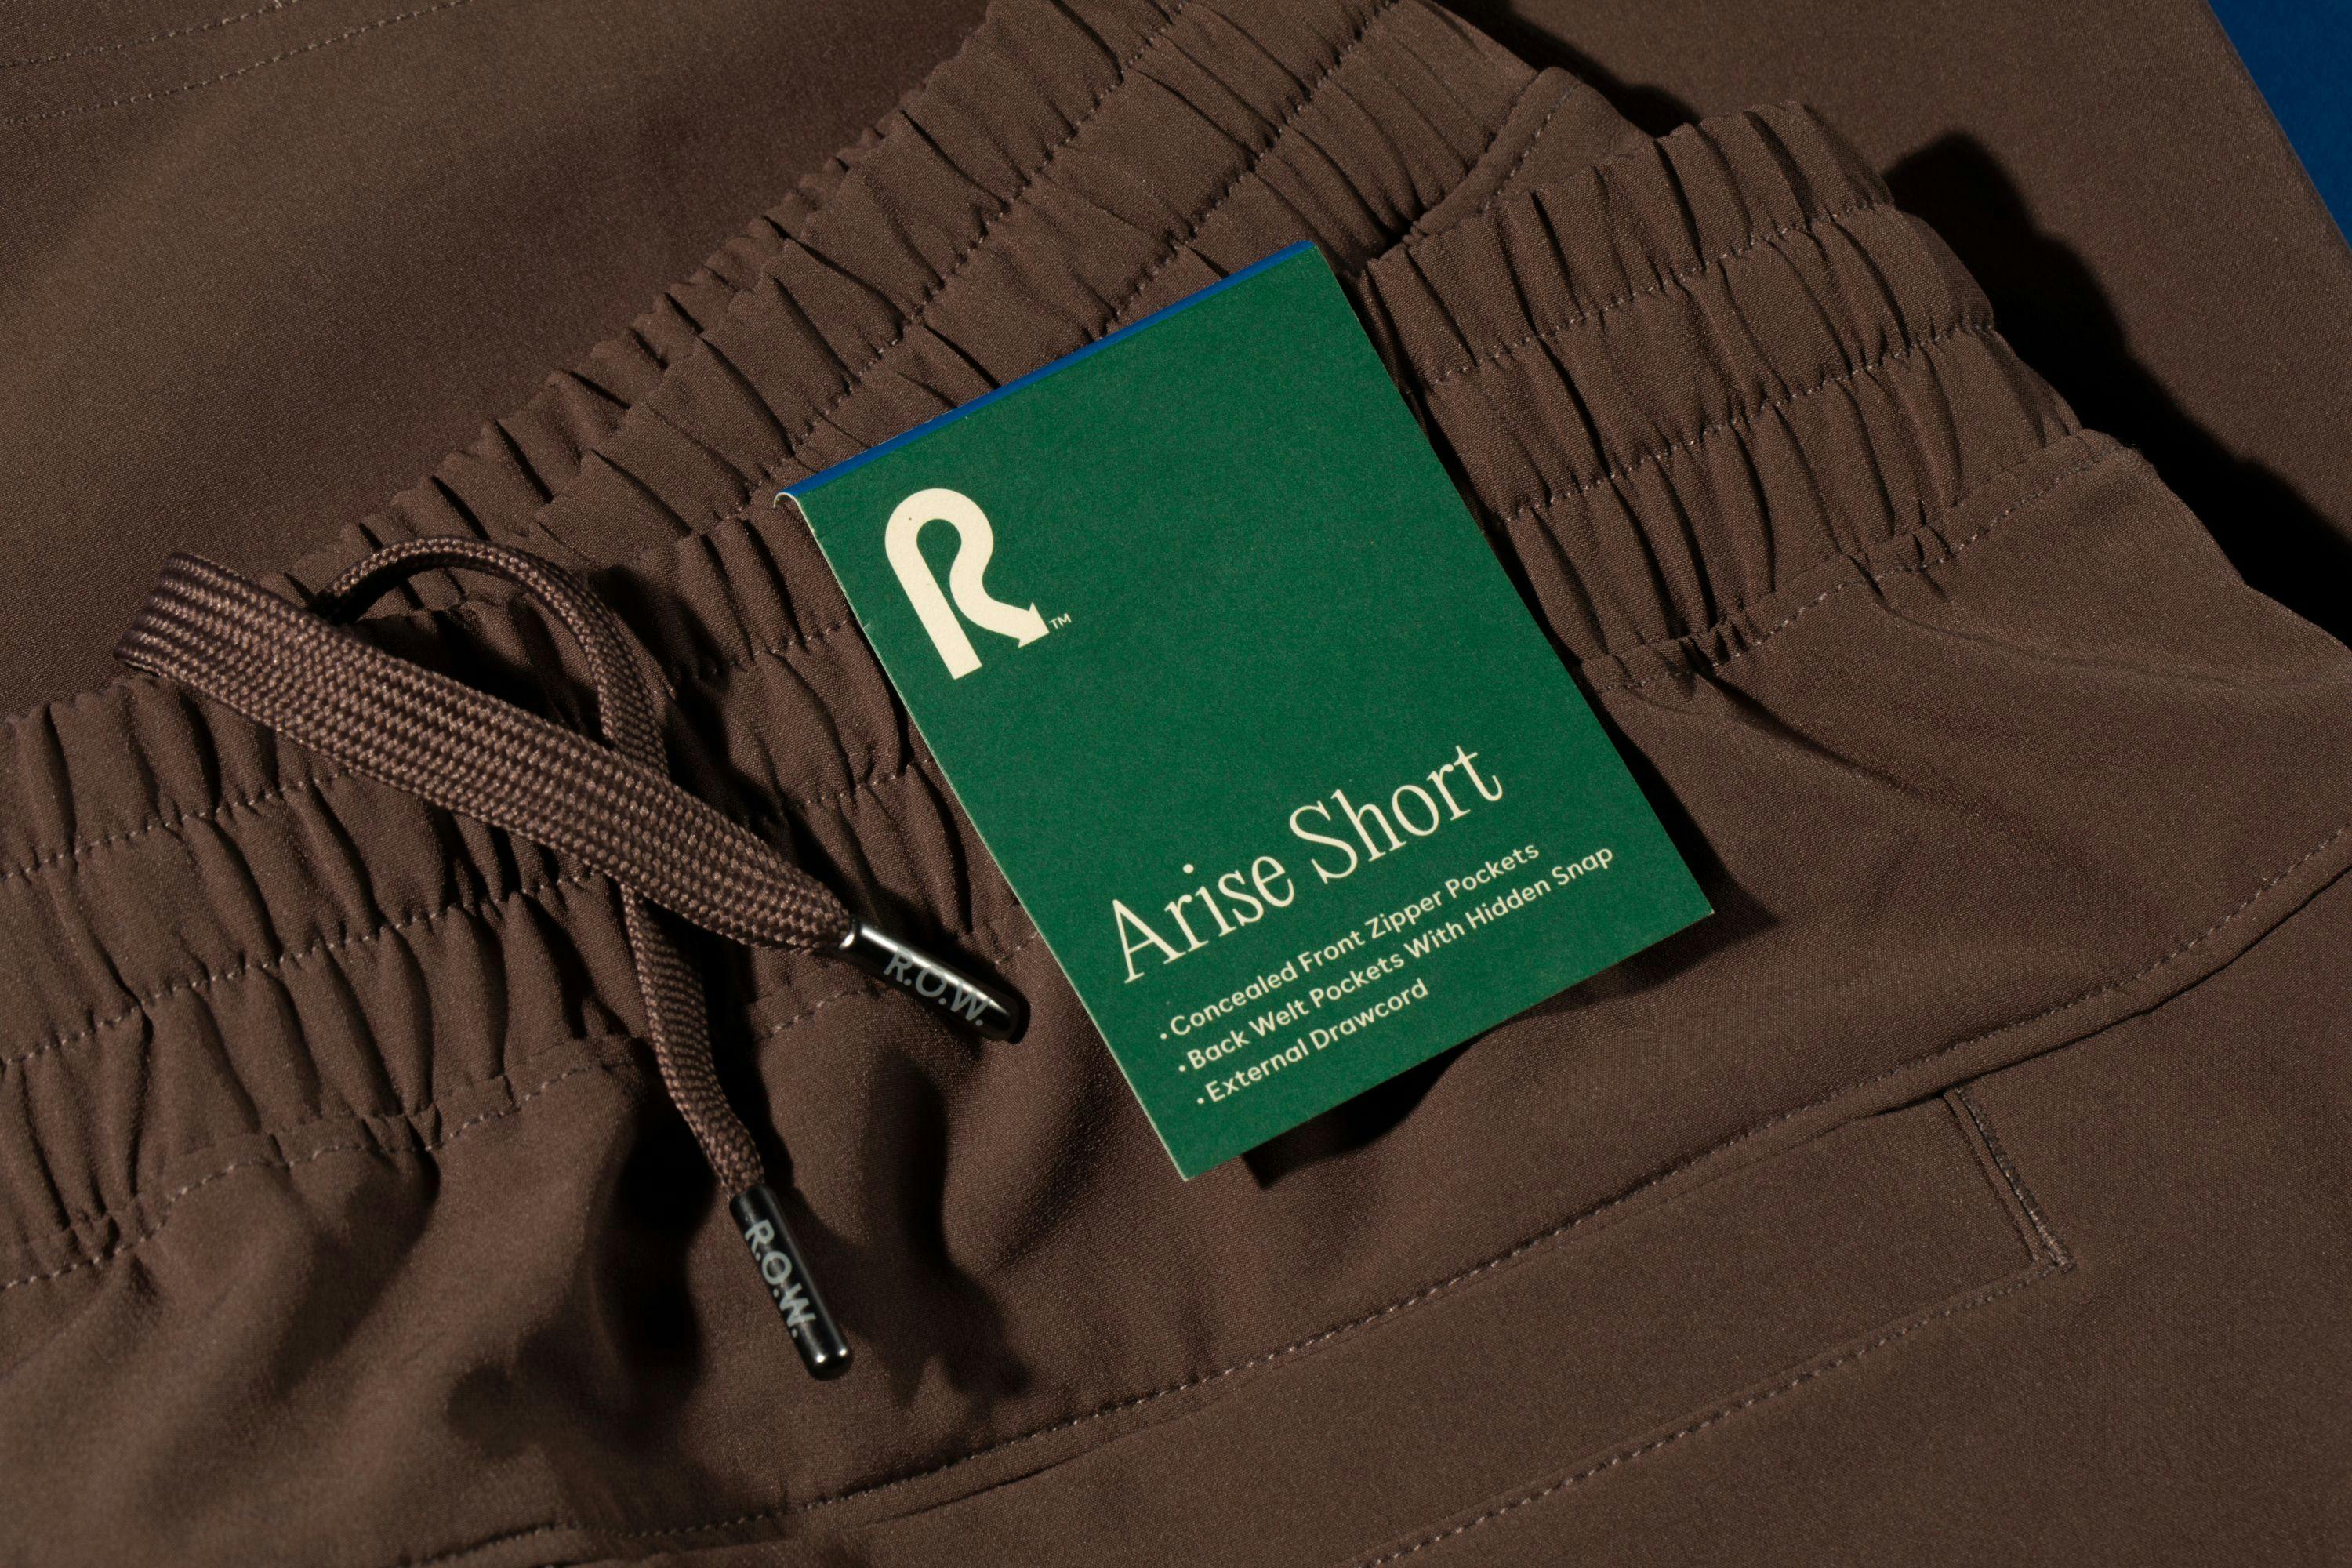 Brown shorts with drawstrings and a green product tag